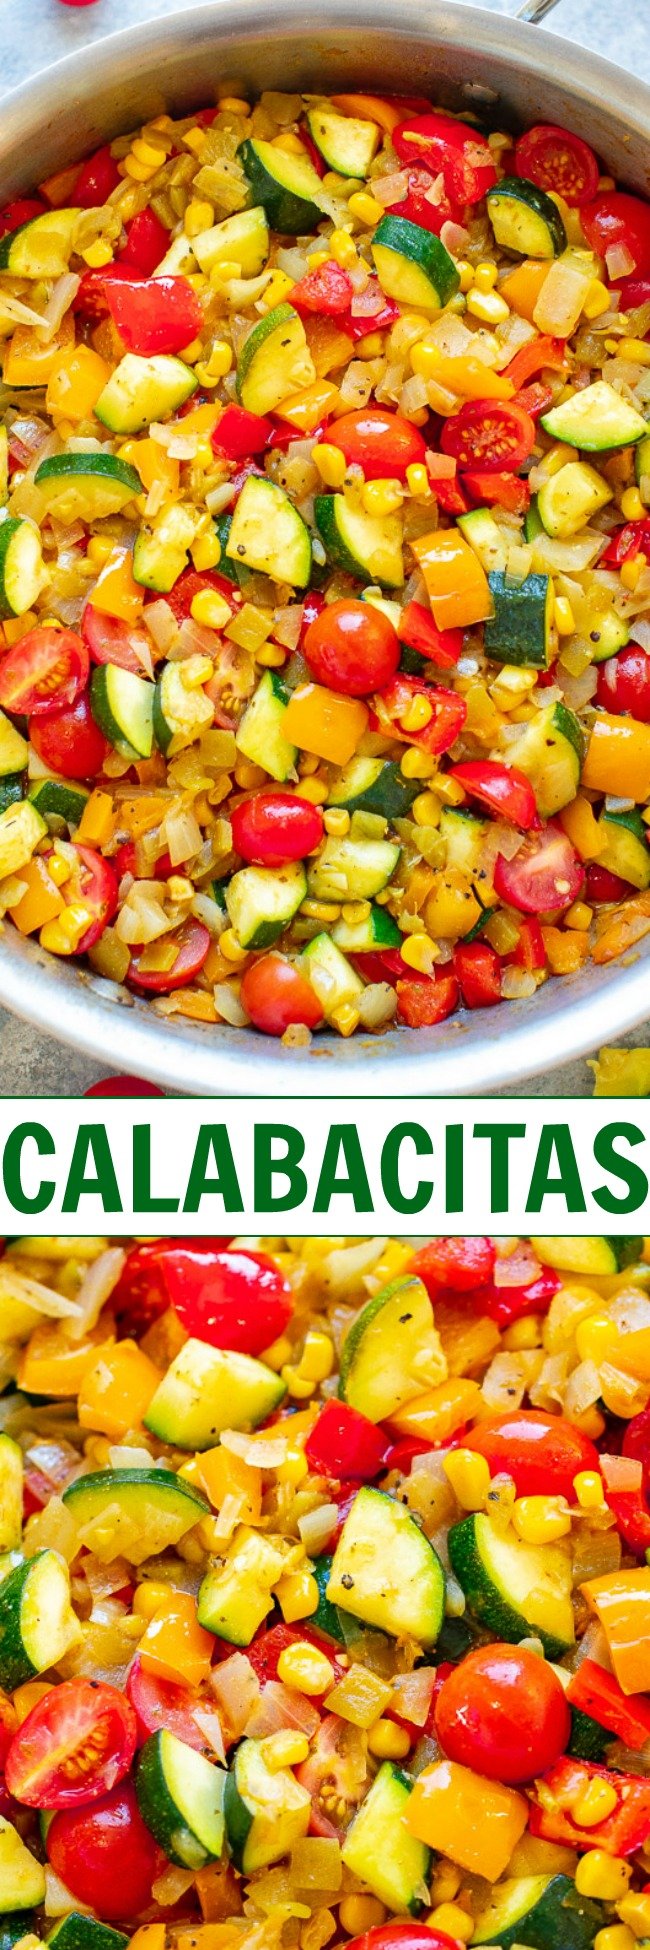 Skillet Zucchini, Corn, and Peppers (Calabacitas) - An EASY Mexican-inspired recipe ready in 15 minutes with zucchini, corn, bell peppers, tomatoes, and green chiles!! HEALTHY, vegan, and naturally gluten-free! When there's an abundance of summer produce, this recipe is PERFECT!! 